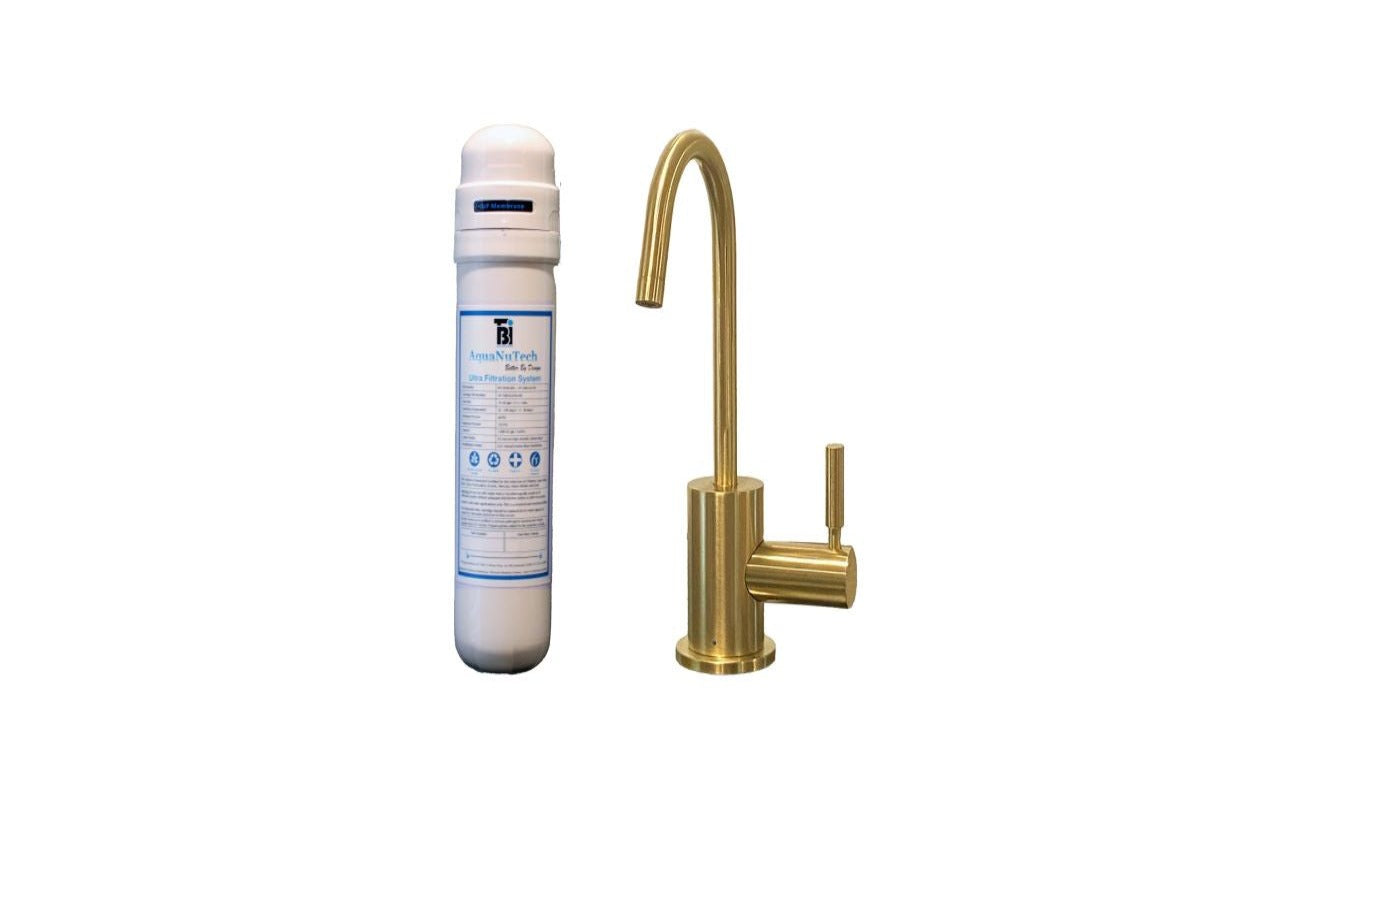 Filtration System Combo - Contemporary C-Spout Cold Water Faucet with Filtration System